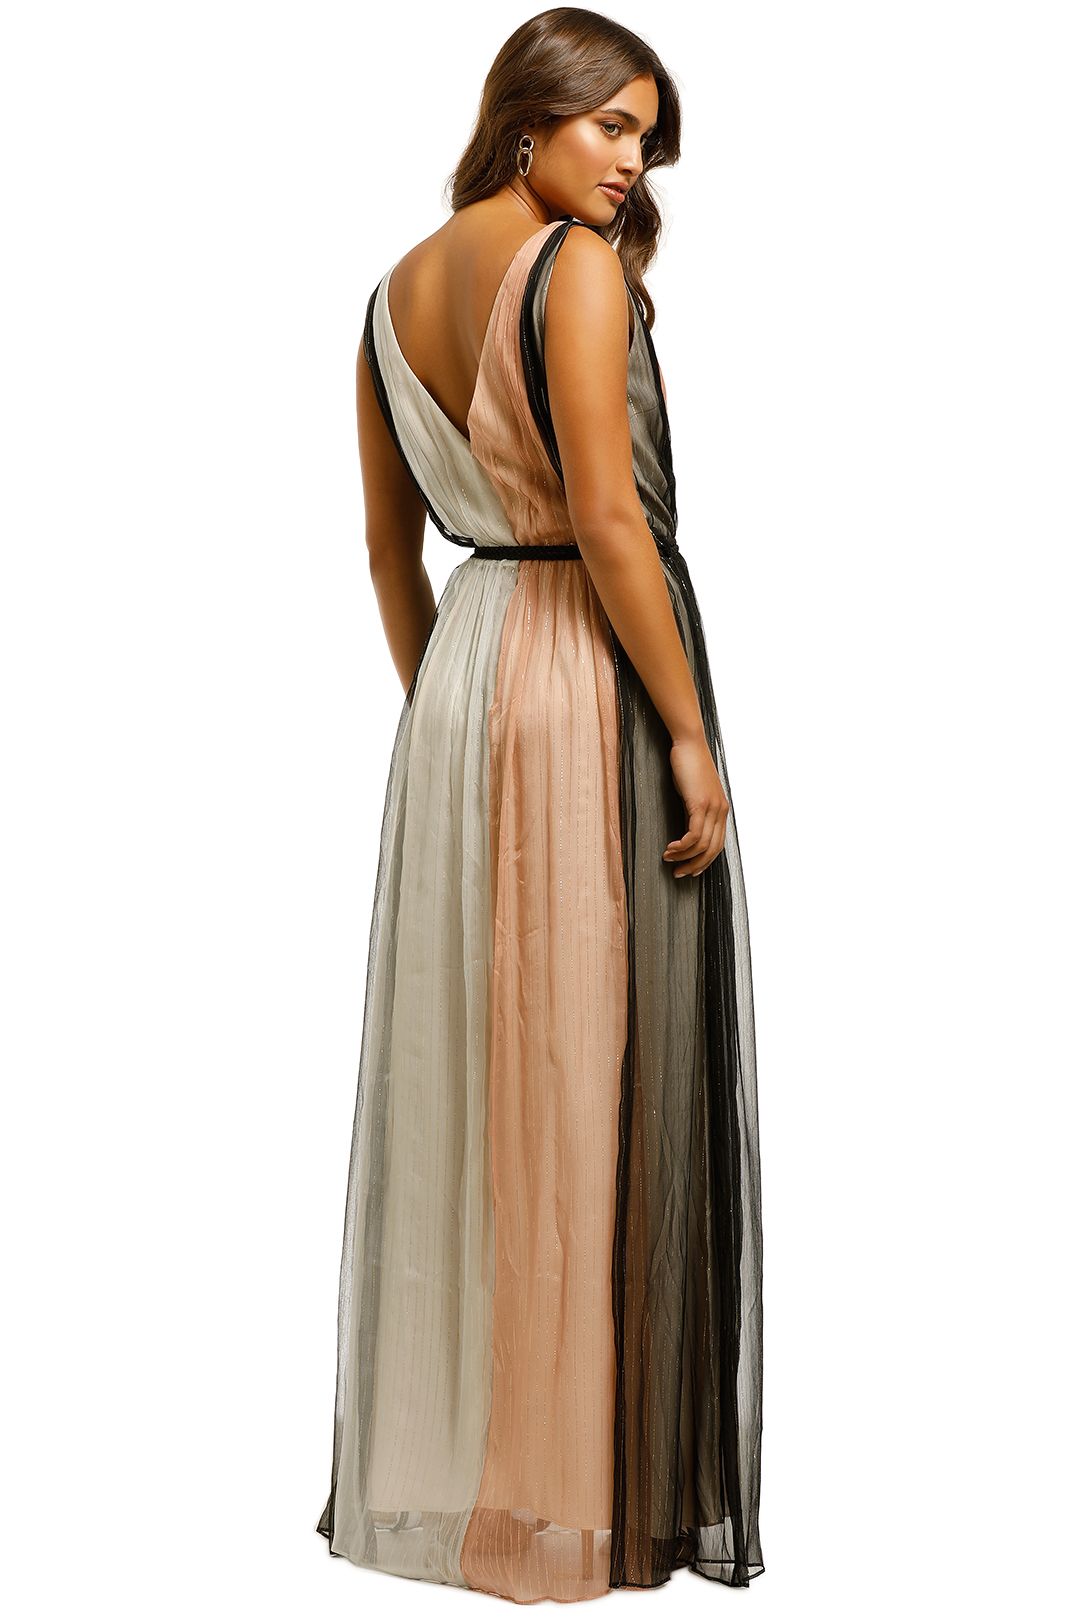 We-Are-Kindred-Marrakech-Sleeveless-Dress-Eclipse-Back